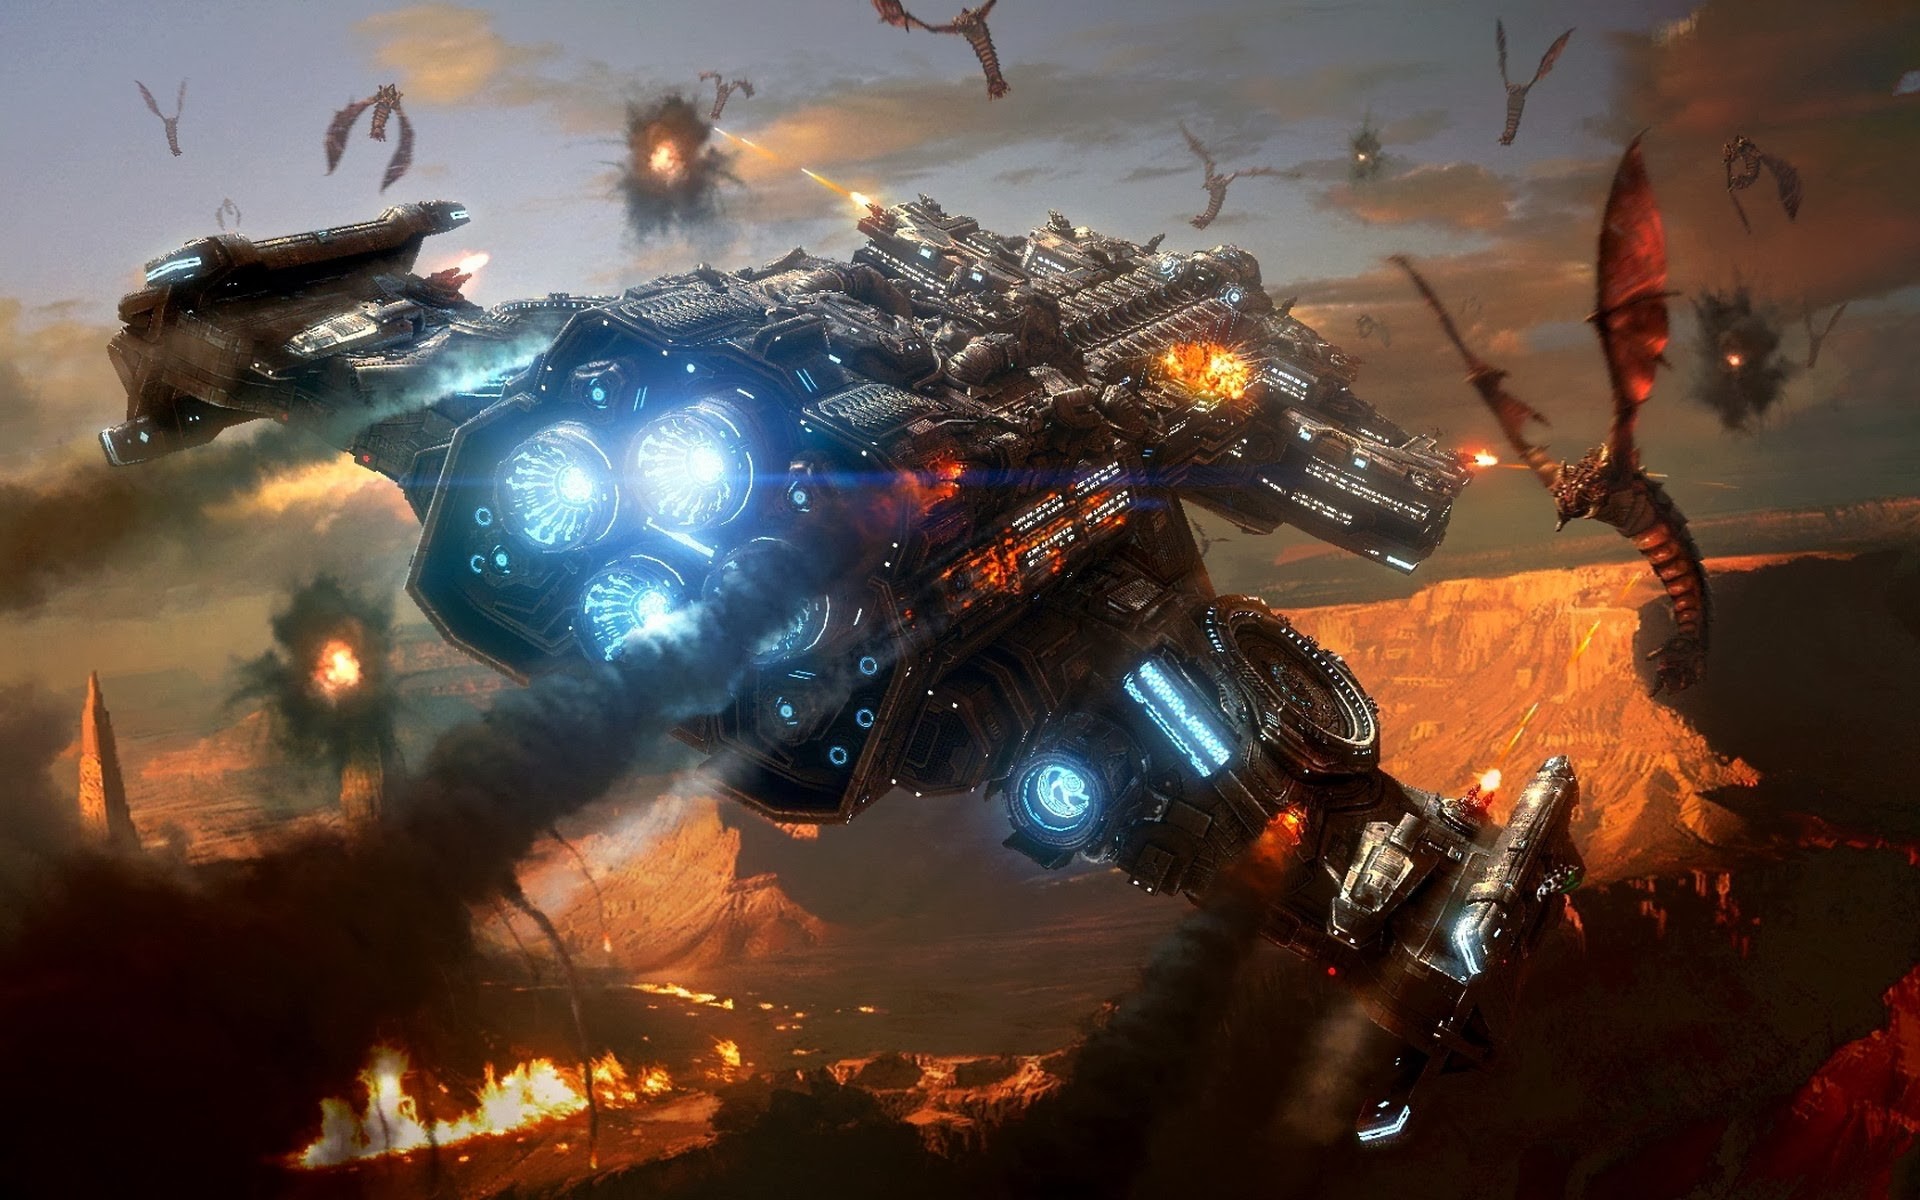 General 1920x1200 Starcraft II video games PC gaming video game art science fiction spaceship vehicle Blizzard Entertainment